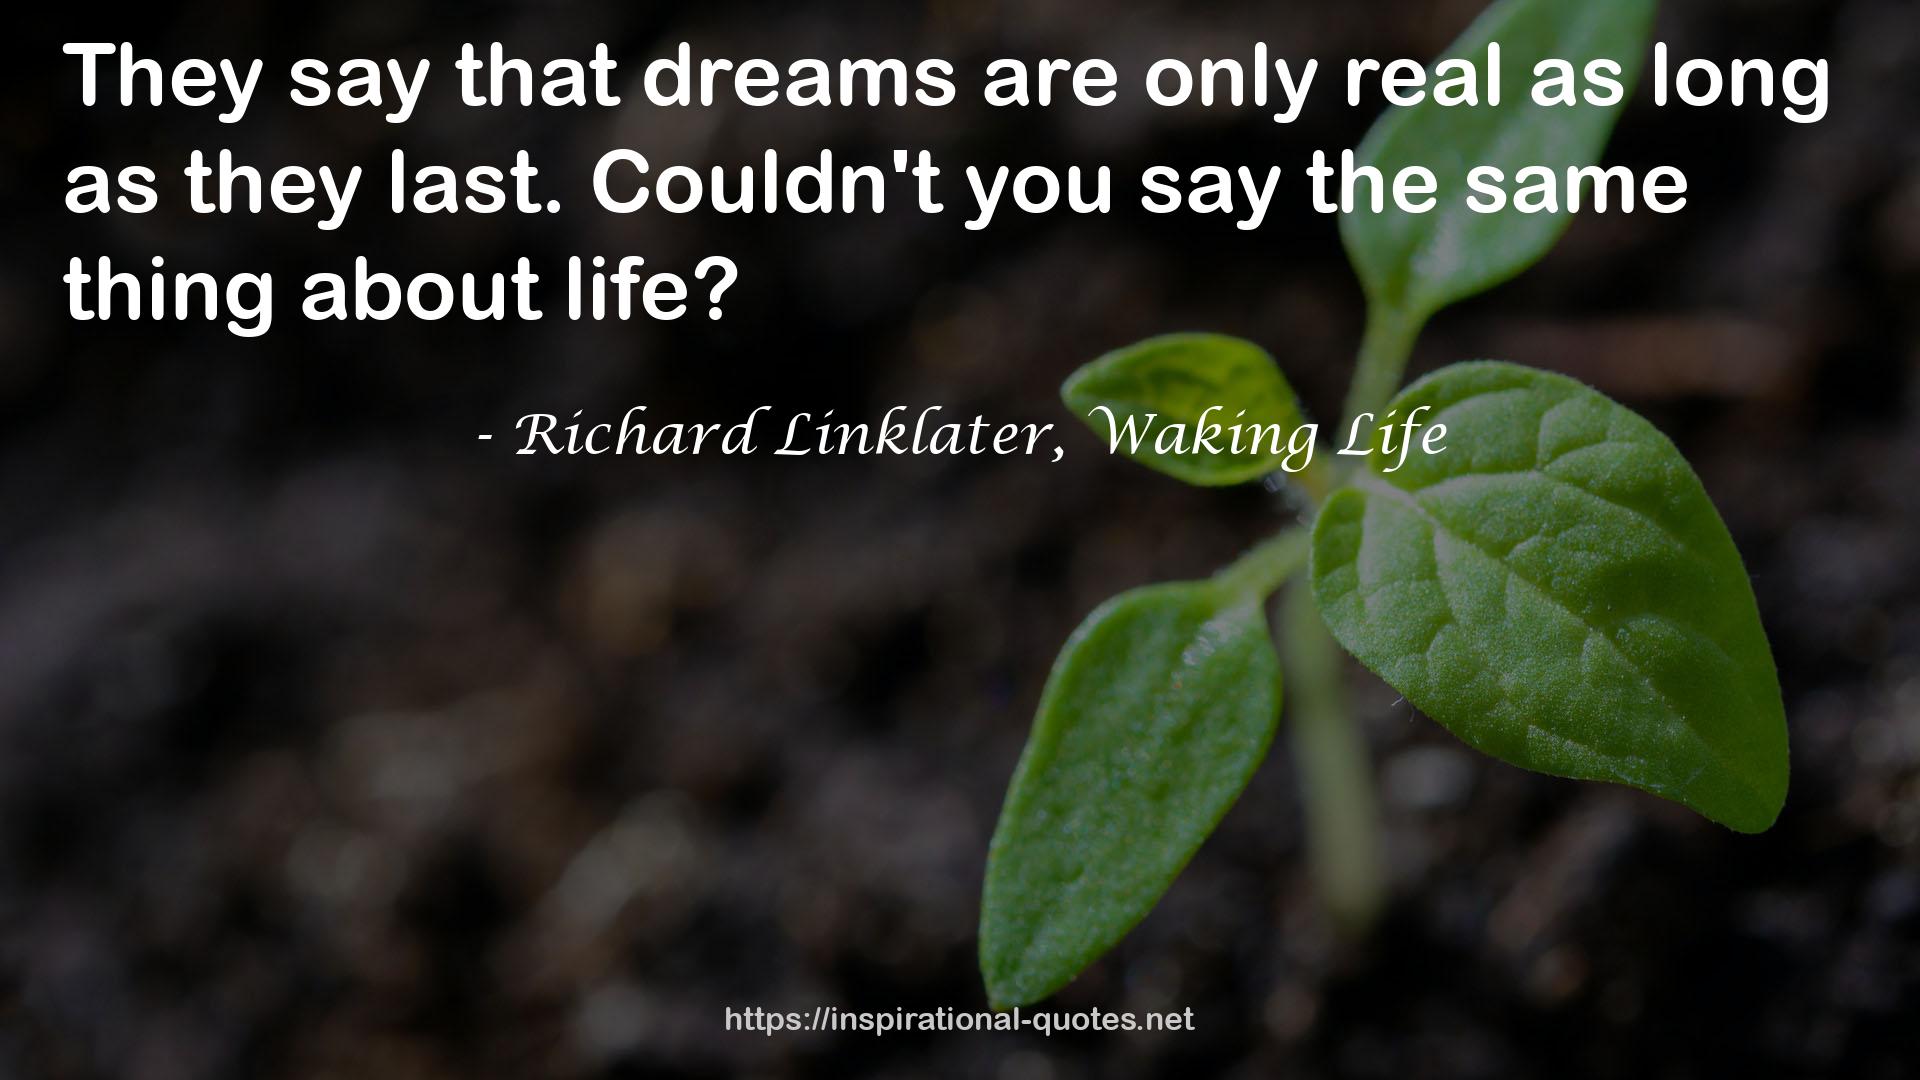 Richard Linklater, Waking Life QUOTES